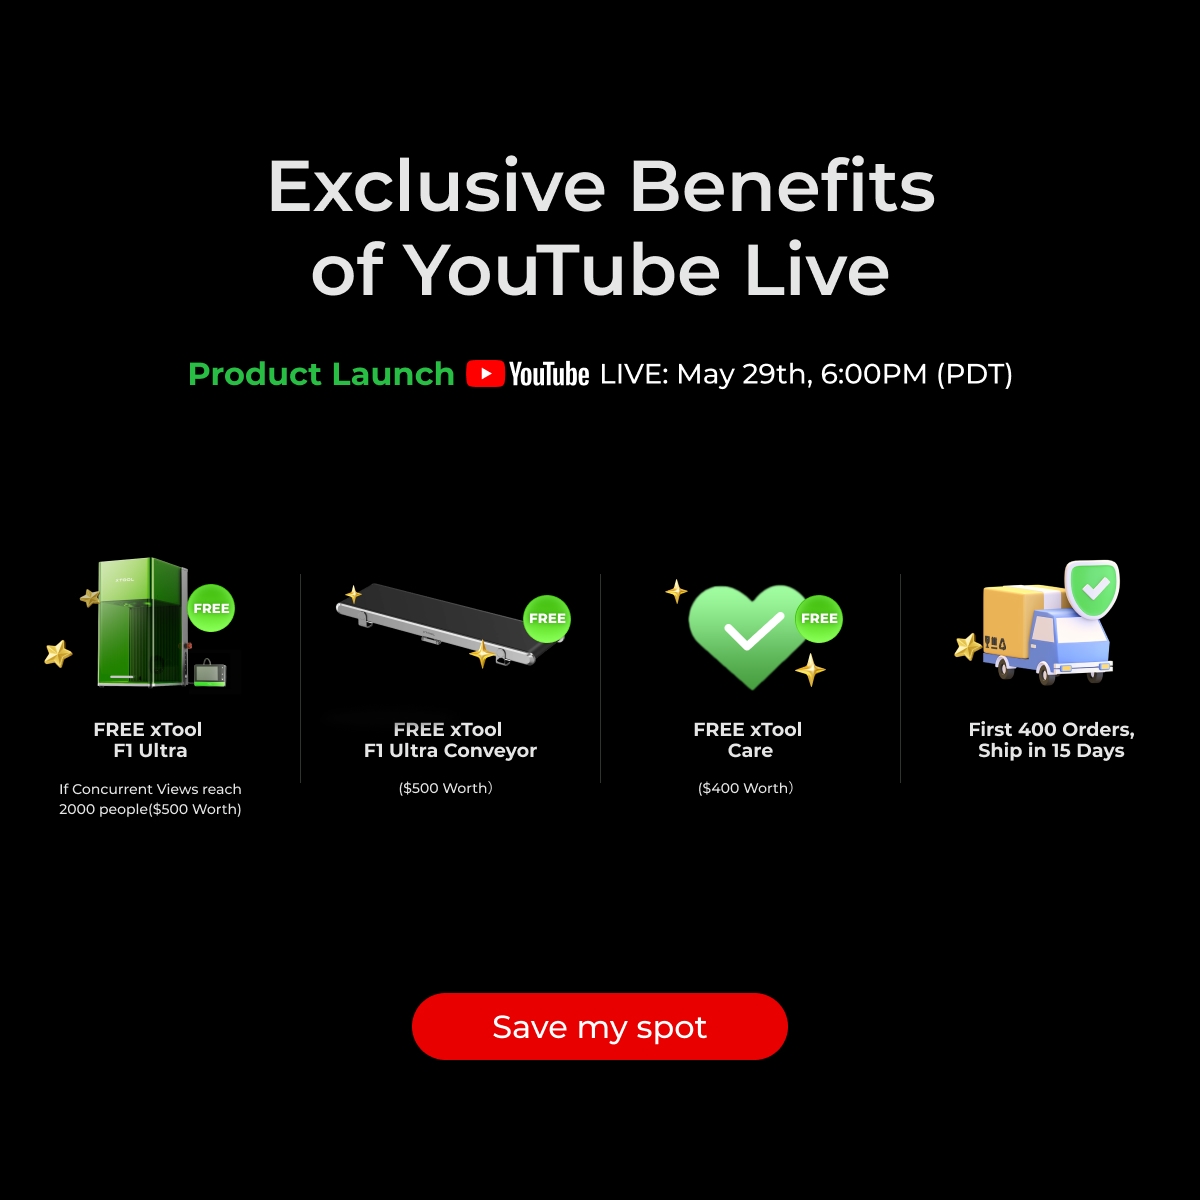 Exclusive Benefits of YouTube Live